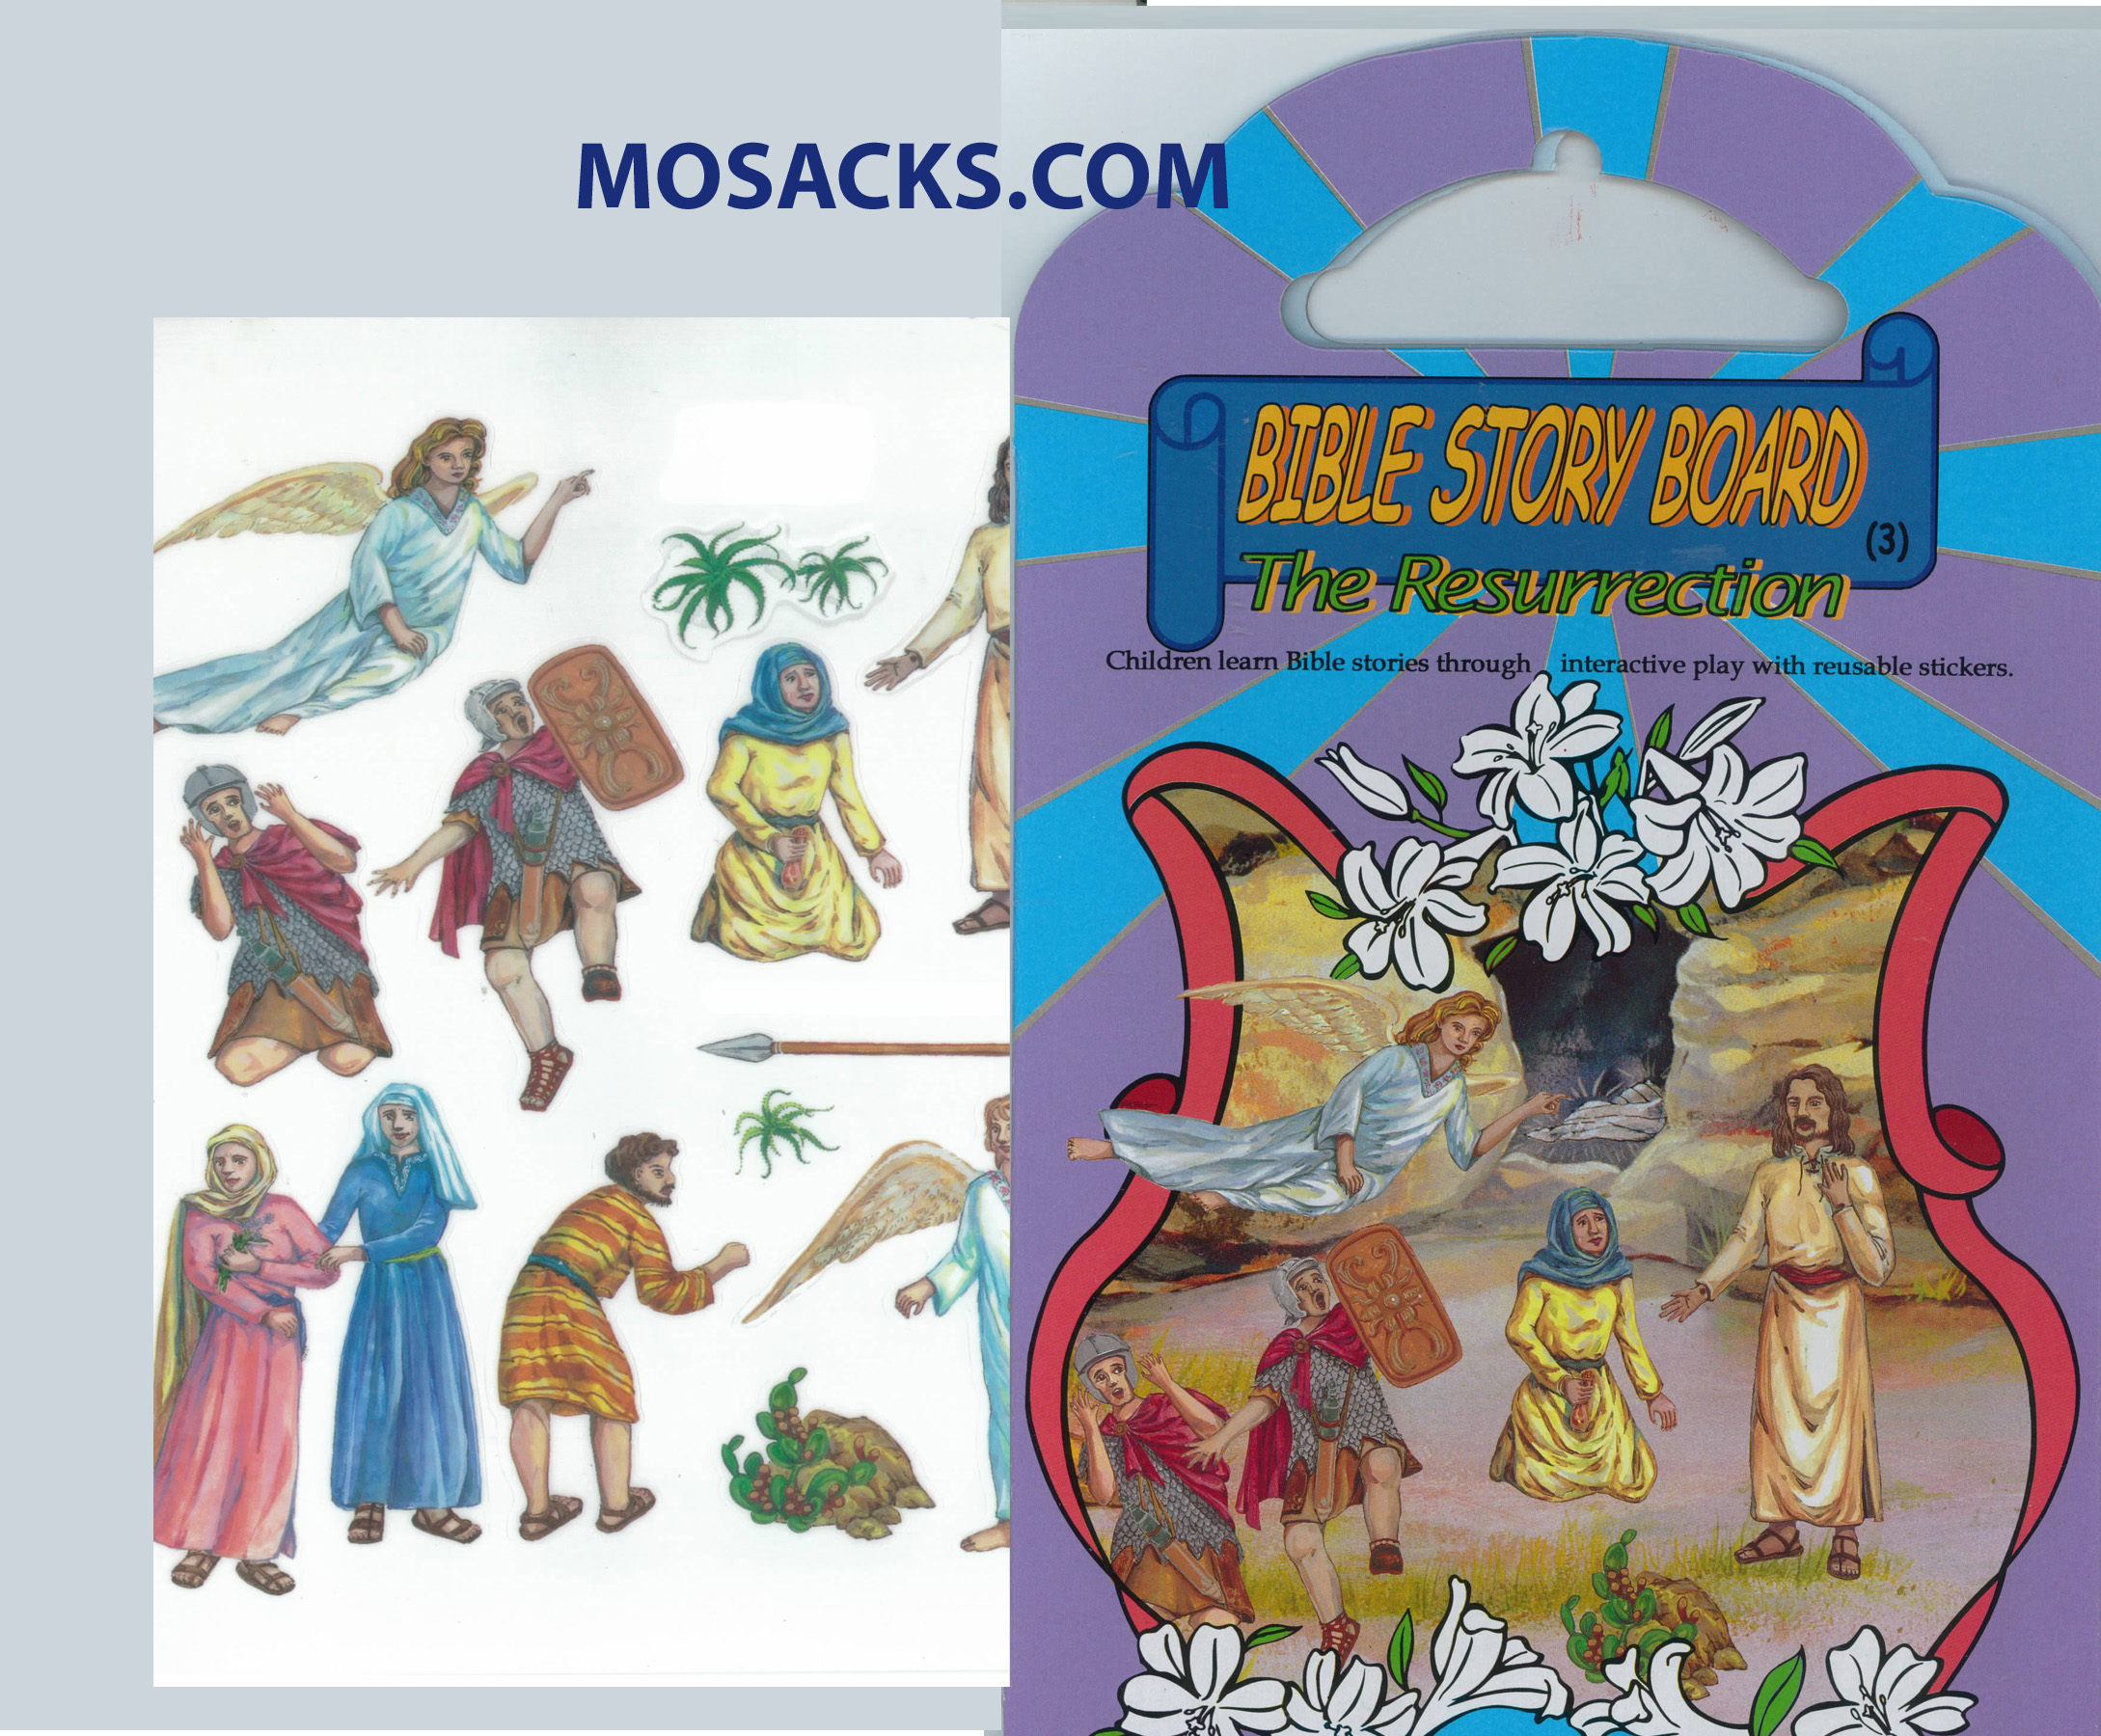 Christian Stickers & Catholic Stickers Bible Story Board The Resurrection 64-RES Story Board and Reusable Stickers